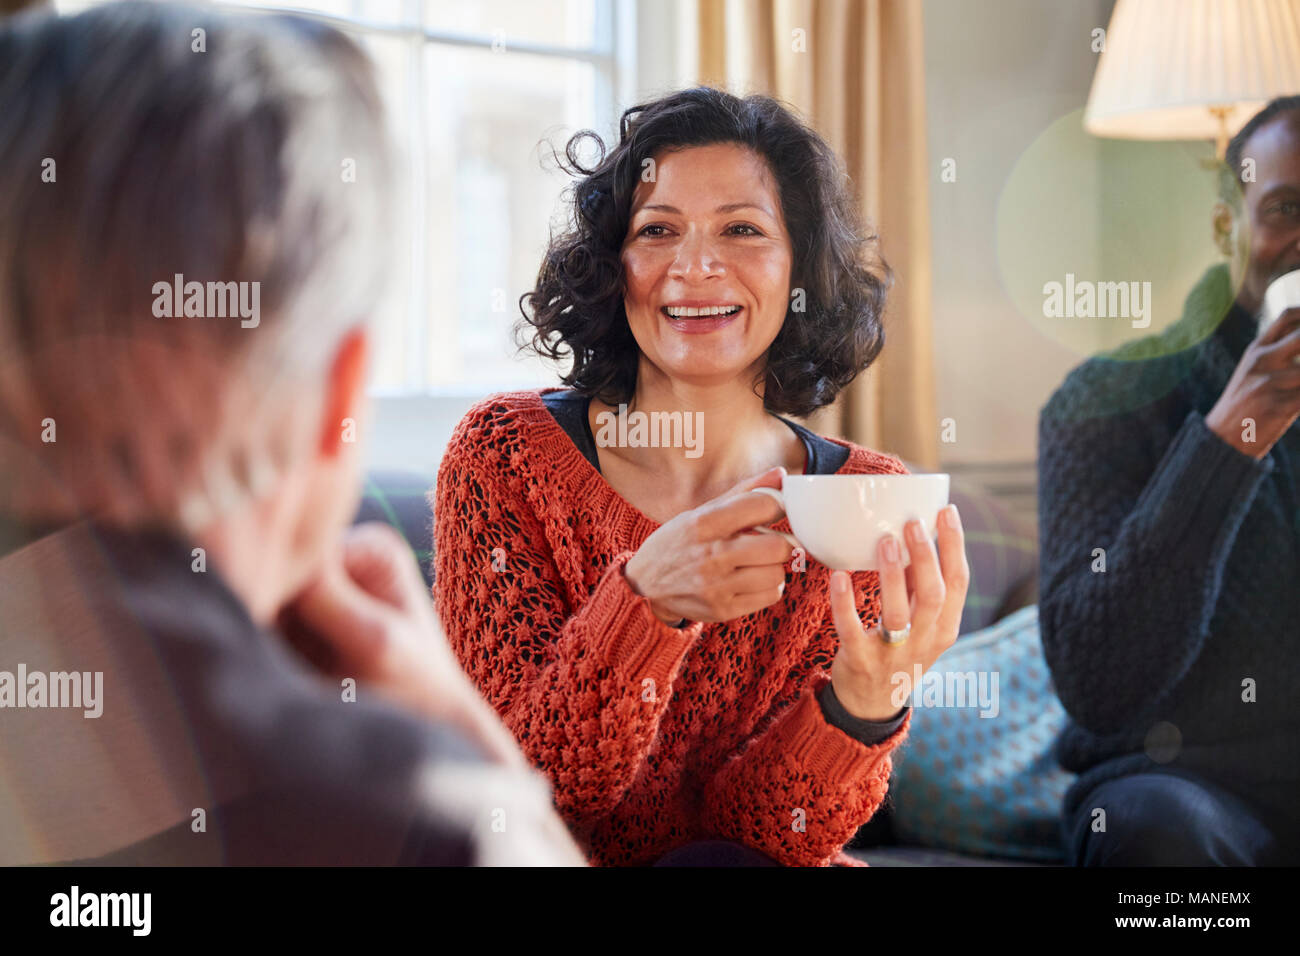 Middle Aged Woman Meeting Friends Around Table In Coffee Shop Stock Photo